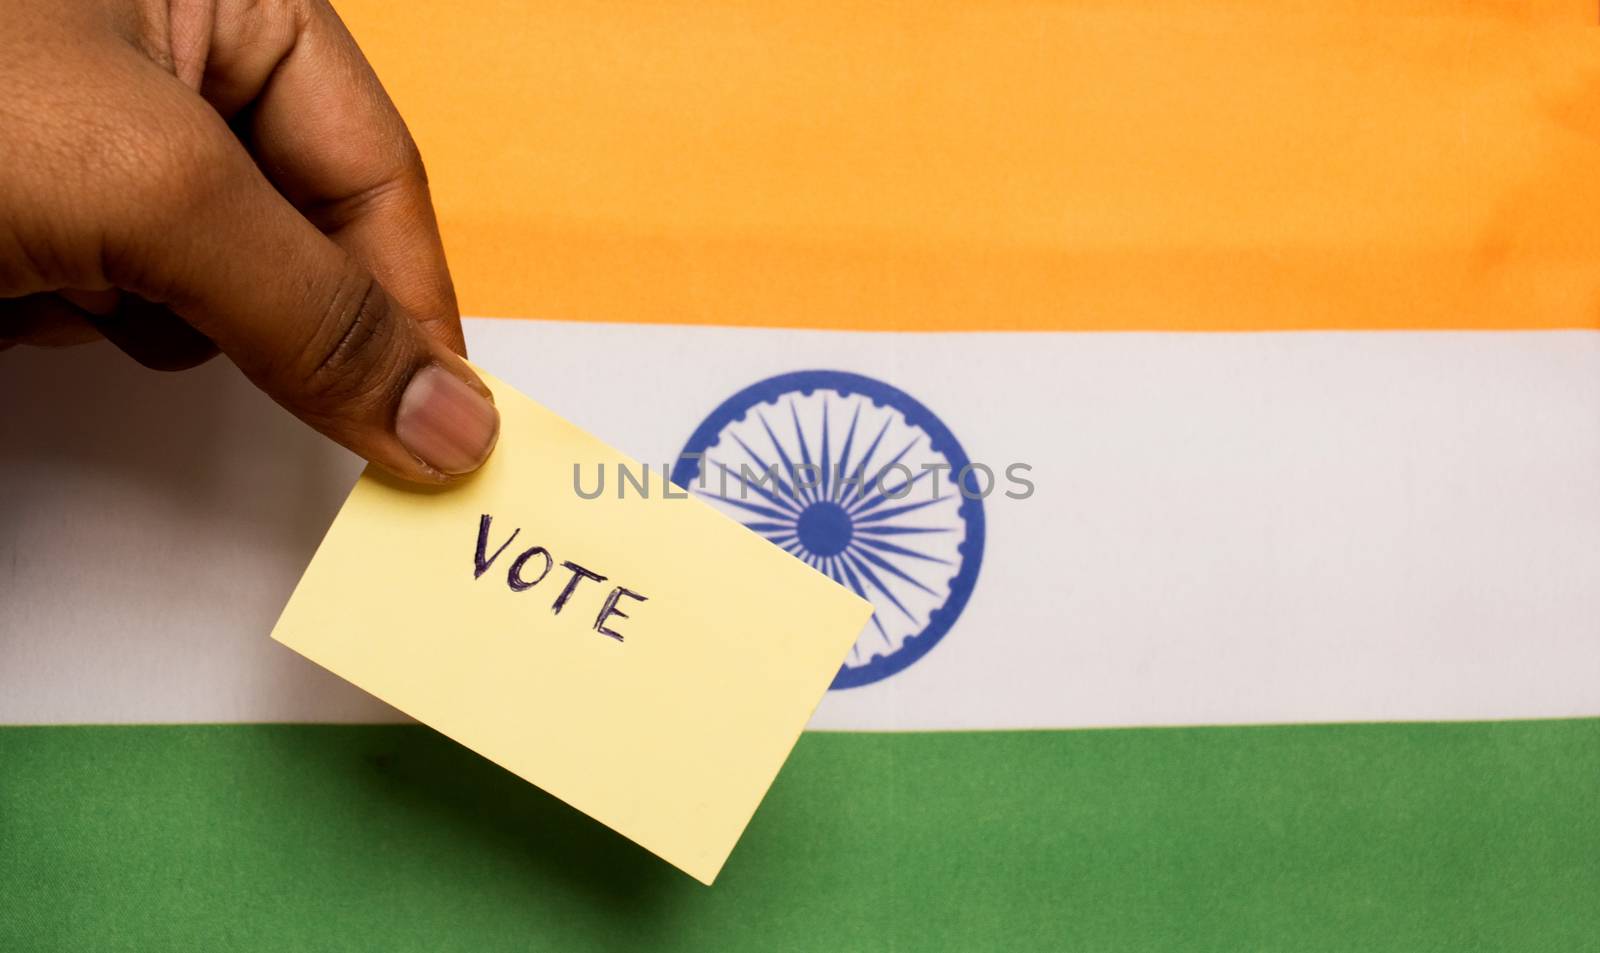 Voting concept - Person holding Hand Written Voting Sticker on India Flag